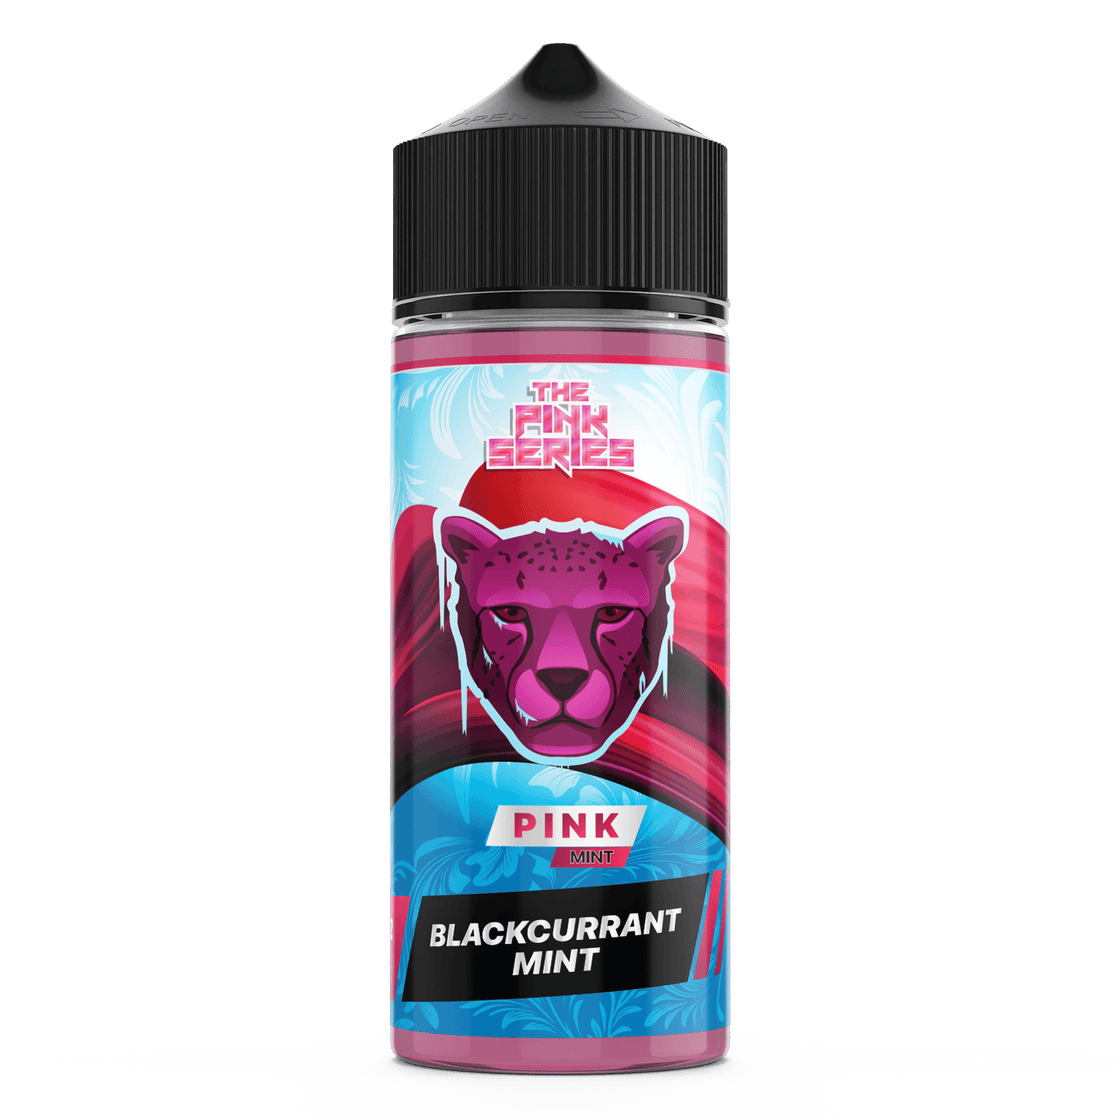 PINK ICE - THE PINK SERIES 100ML SHORT FILL E-LIQUID BY DR.VAPES - Vapeslough